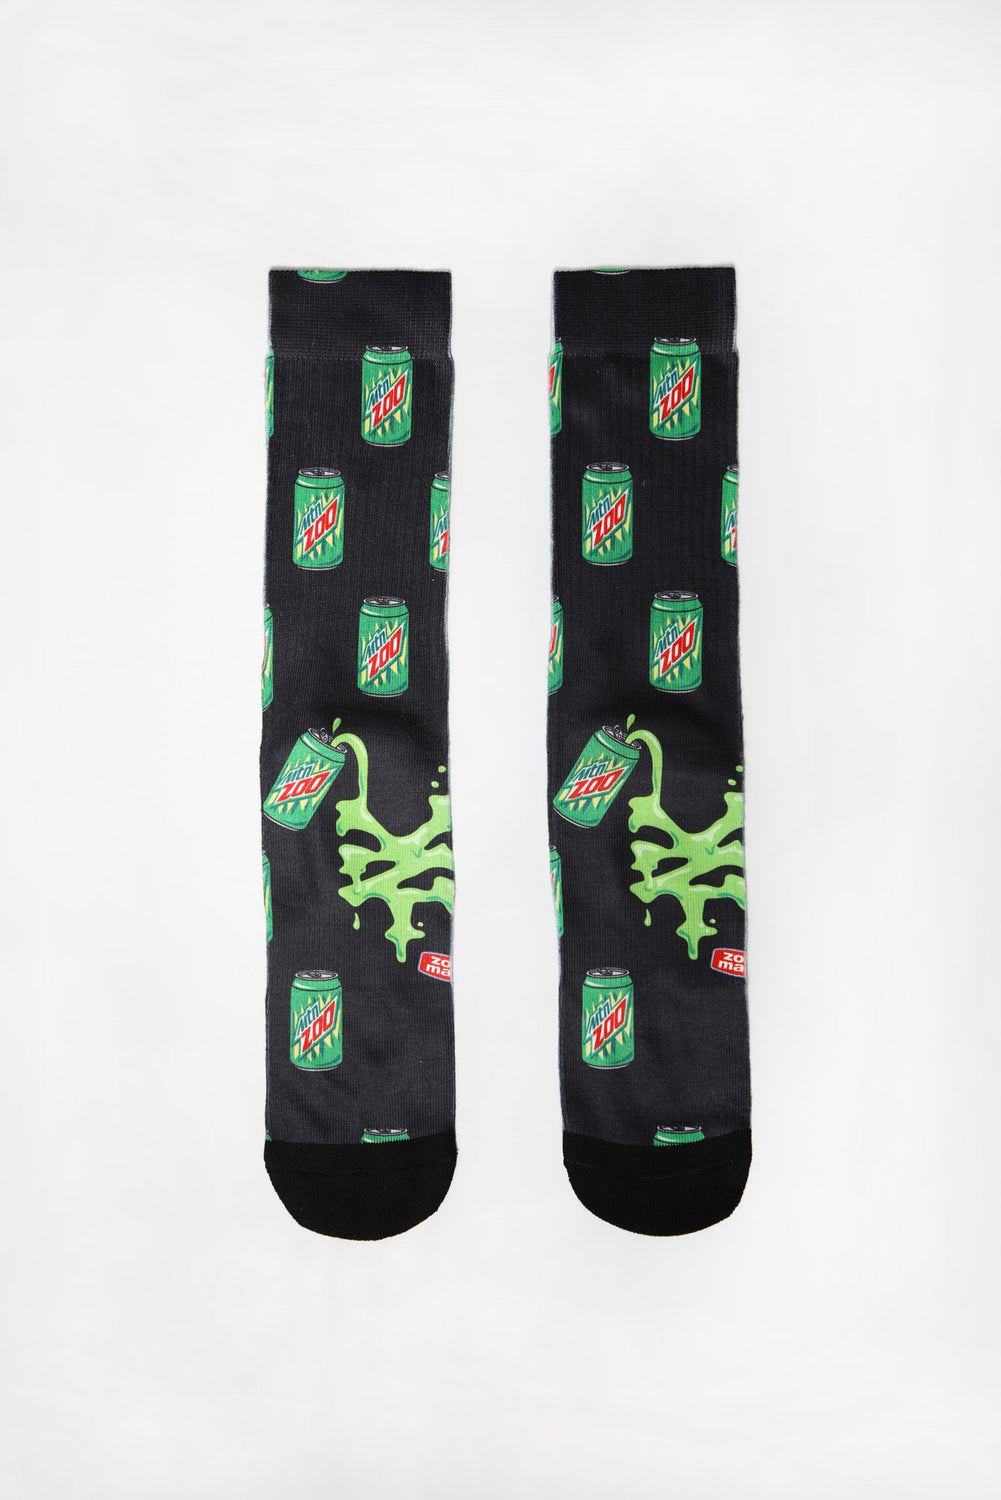 Chaussettes Mtn Zoo Zoo York Junior Chaussettes Mtn Zoo Zoo York Junior